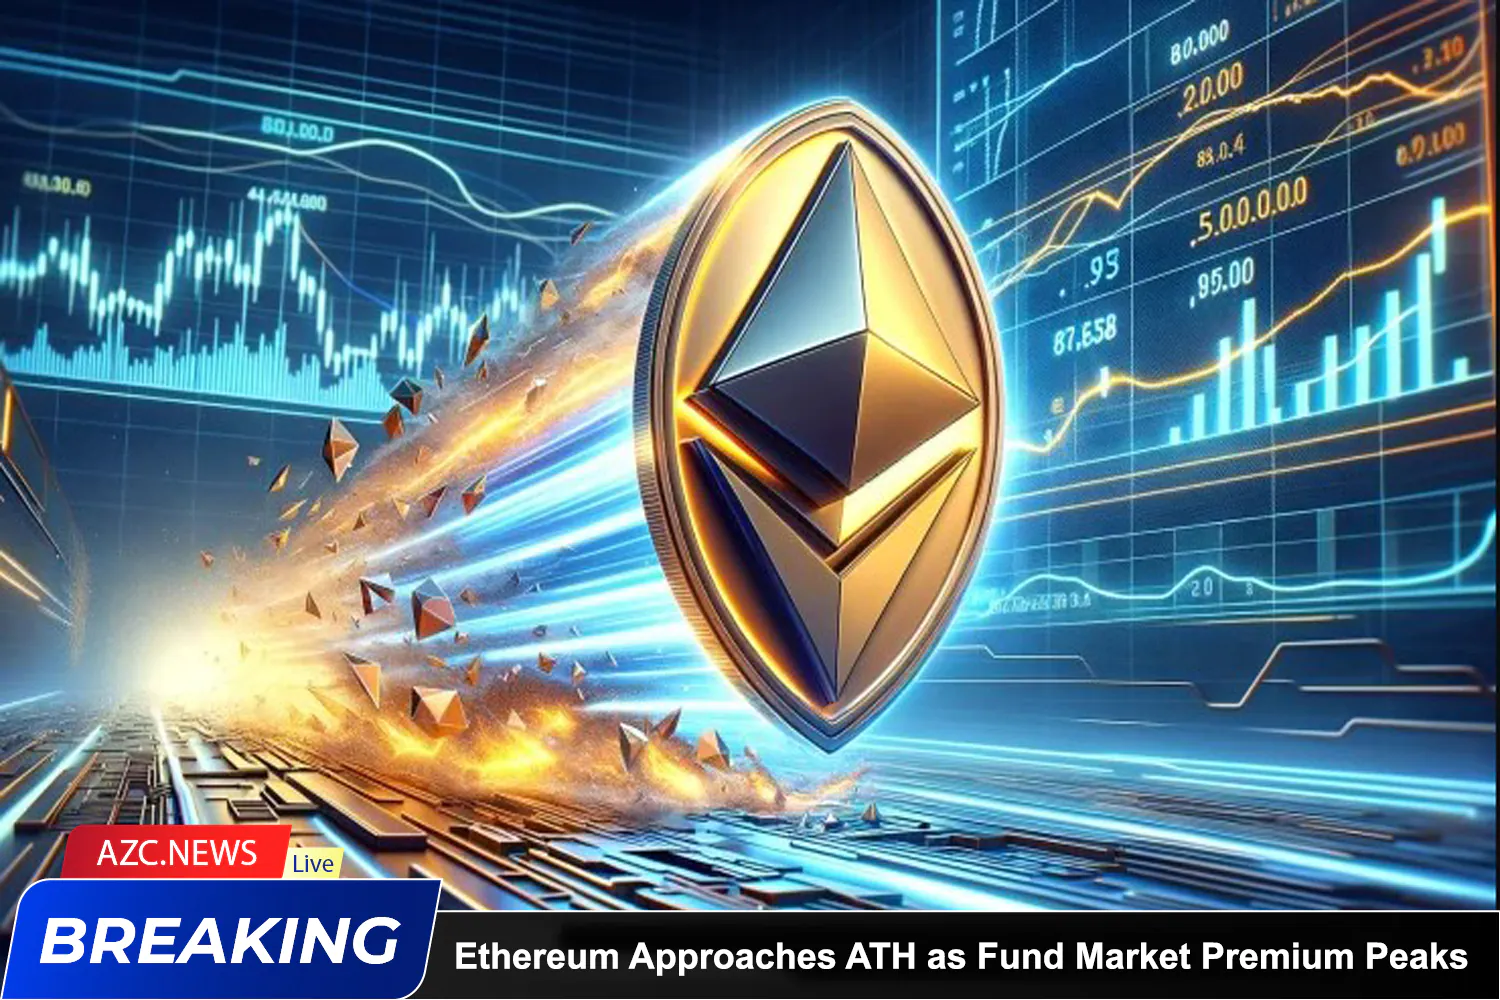 Azcnews Ethereum Approaches Ath As Fund Market Premium Peaks